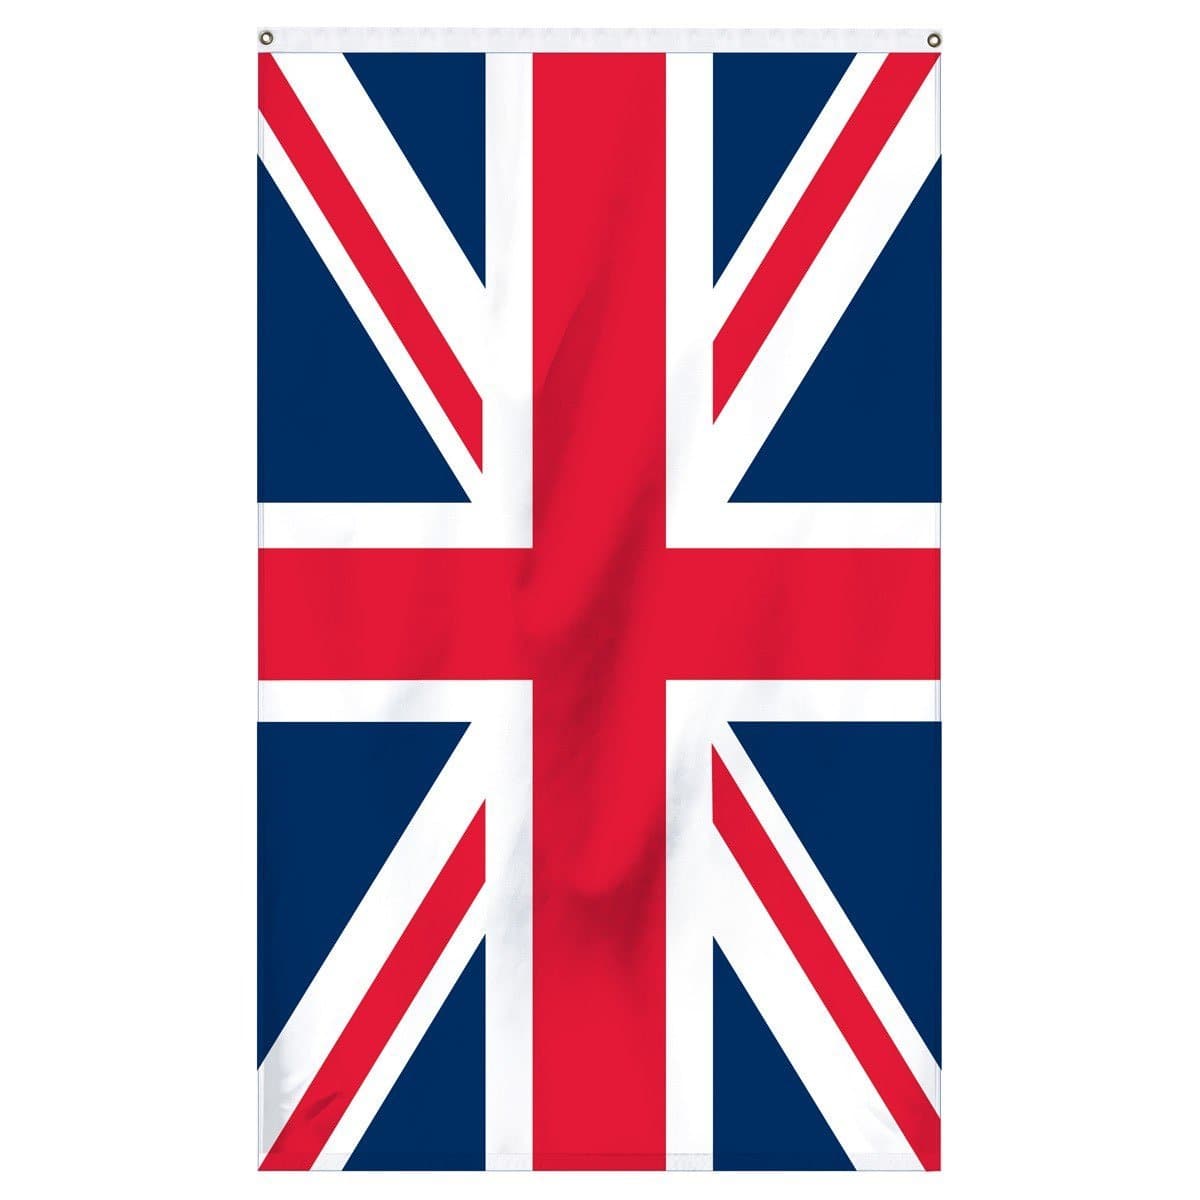 United Kingdom (Great Britain) National Flag for sale to buy online from Atlantic Flagpole. Traditional Great Britain flag with navy blue and red and white crosses. 